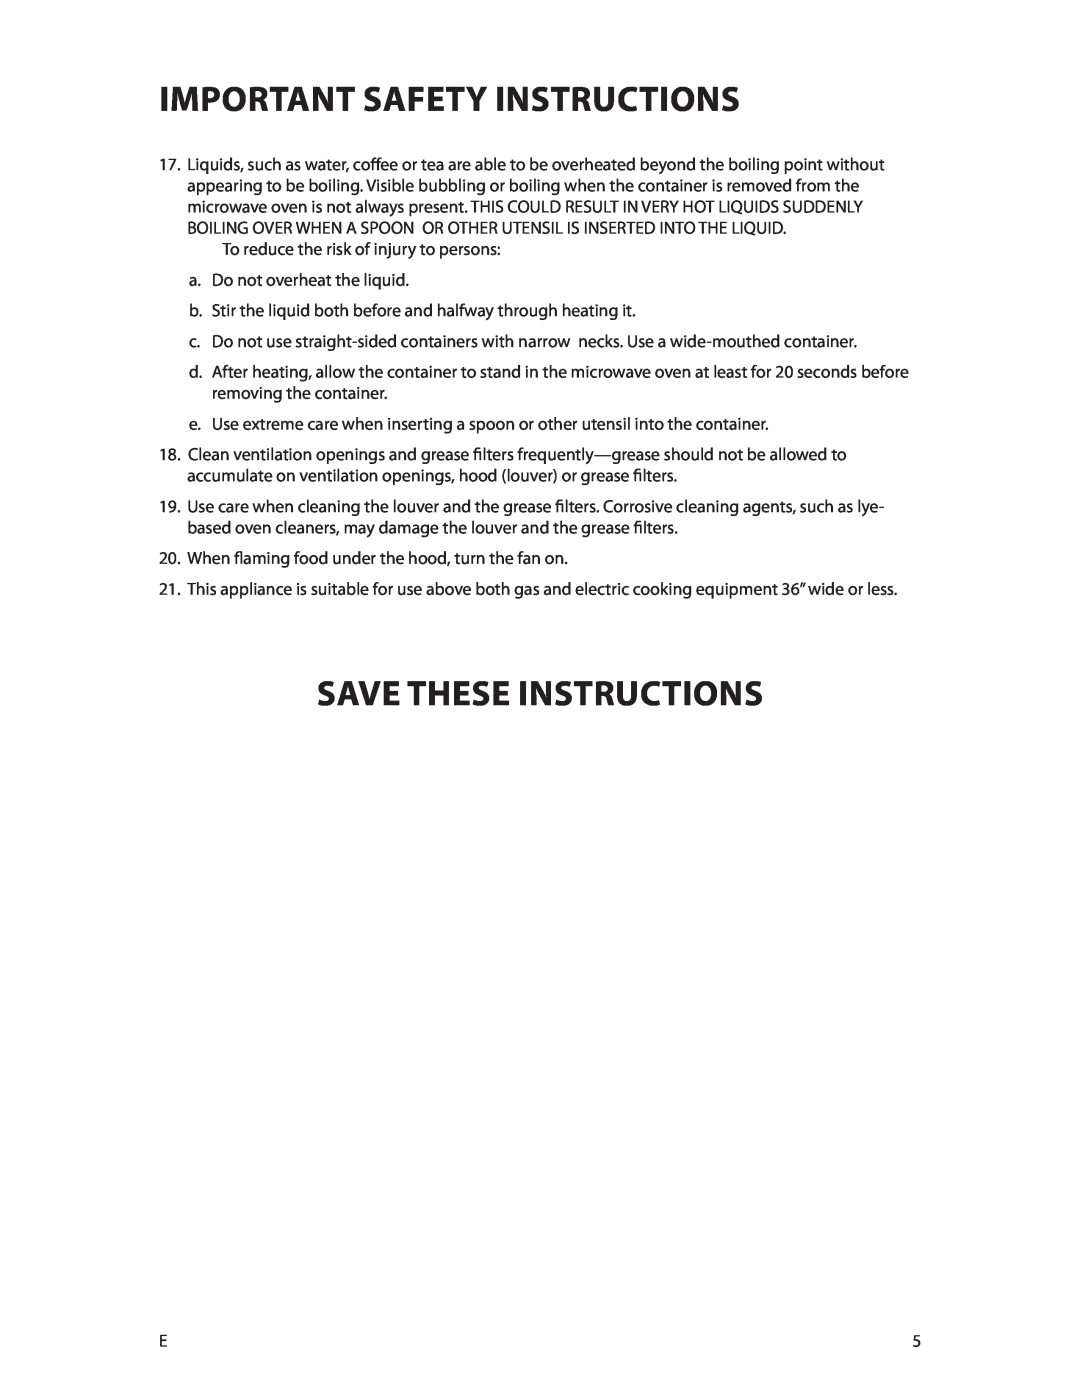 DCS CMOH30SS manual Save These Instructions, Important Safety Instructions 